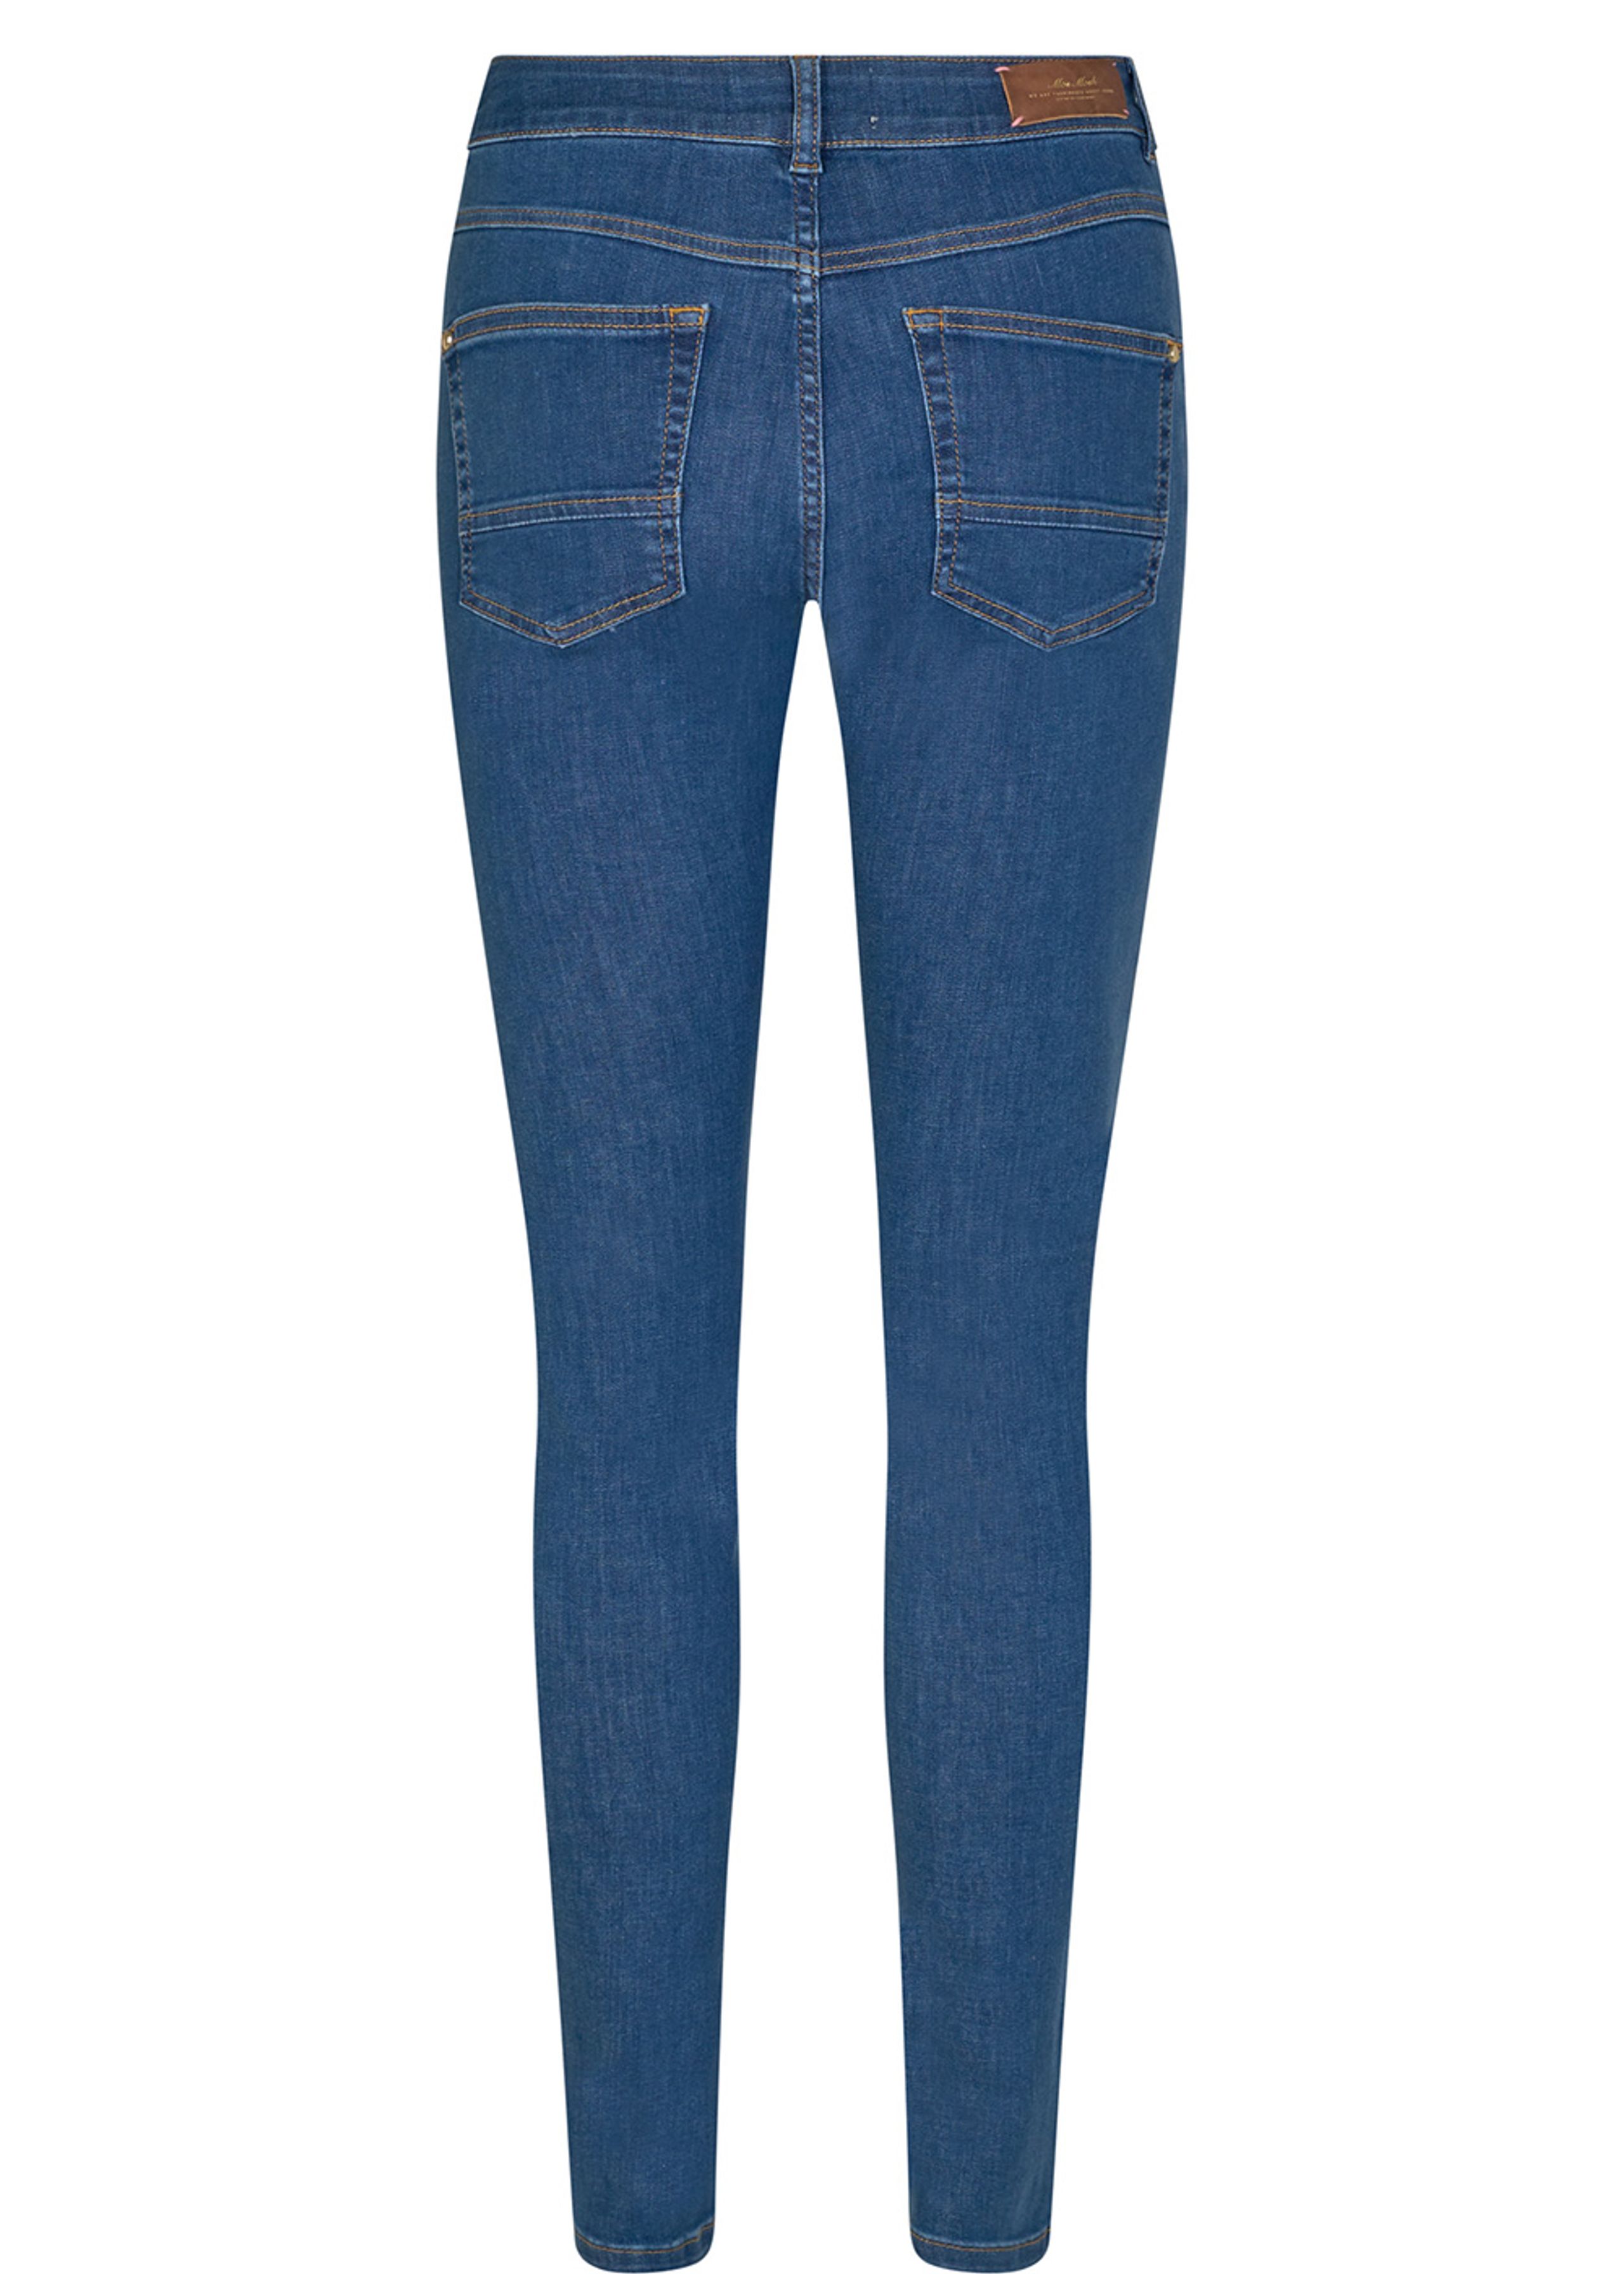 Naomi Cover Jeans - Jeans - Mosh